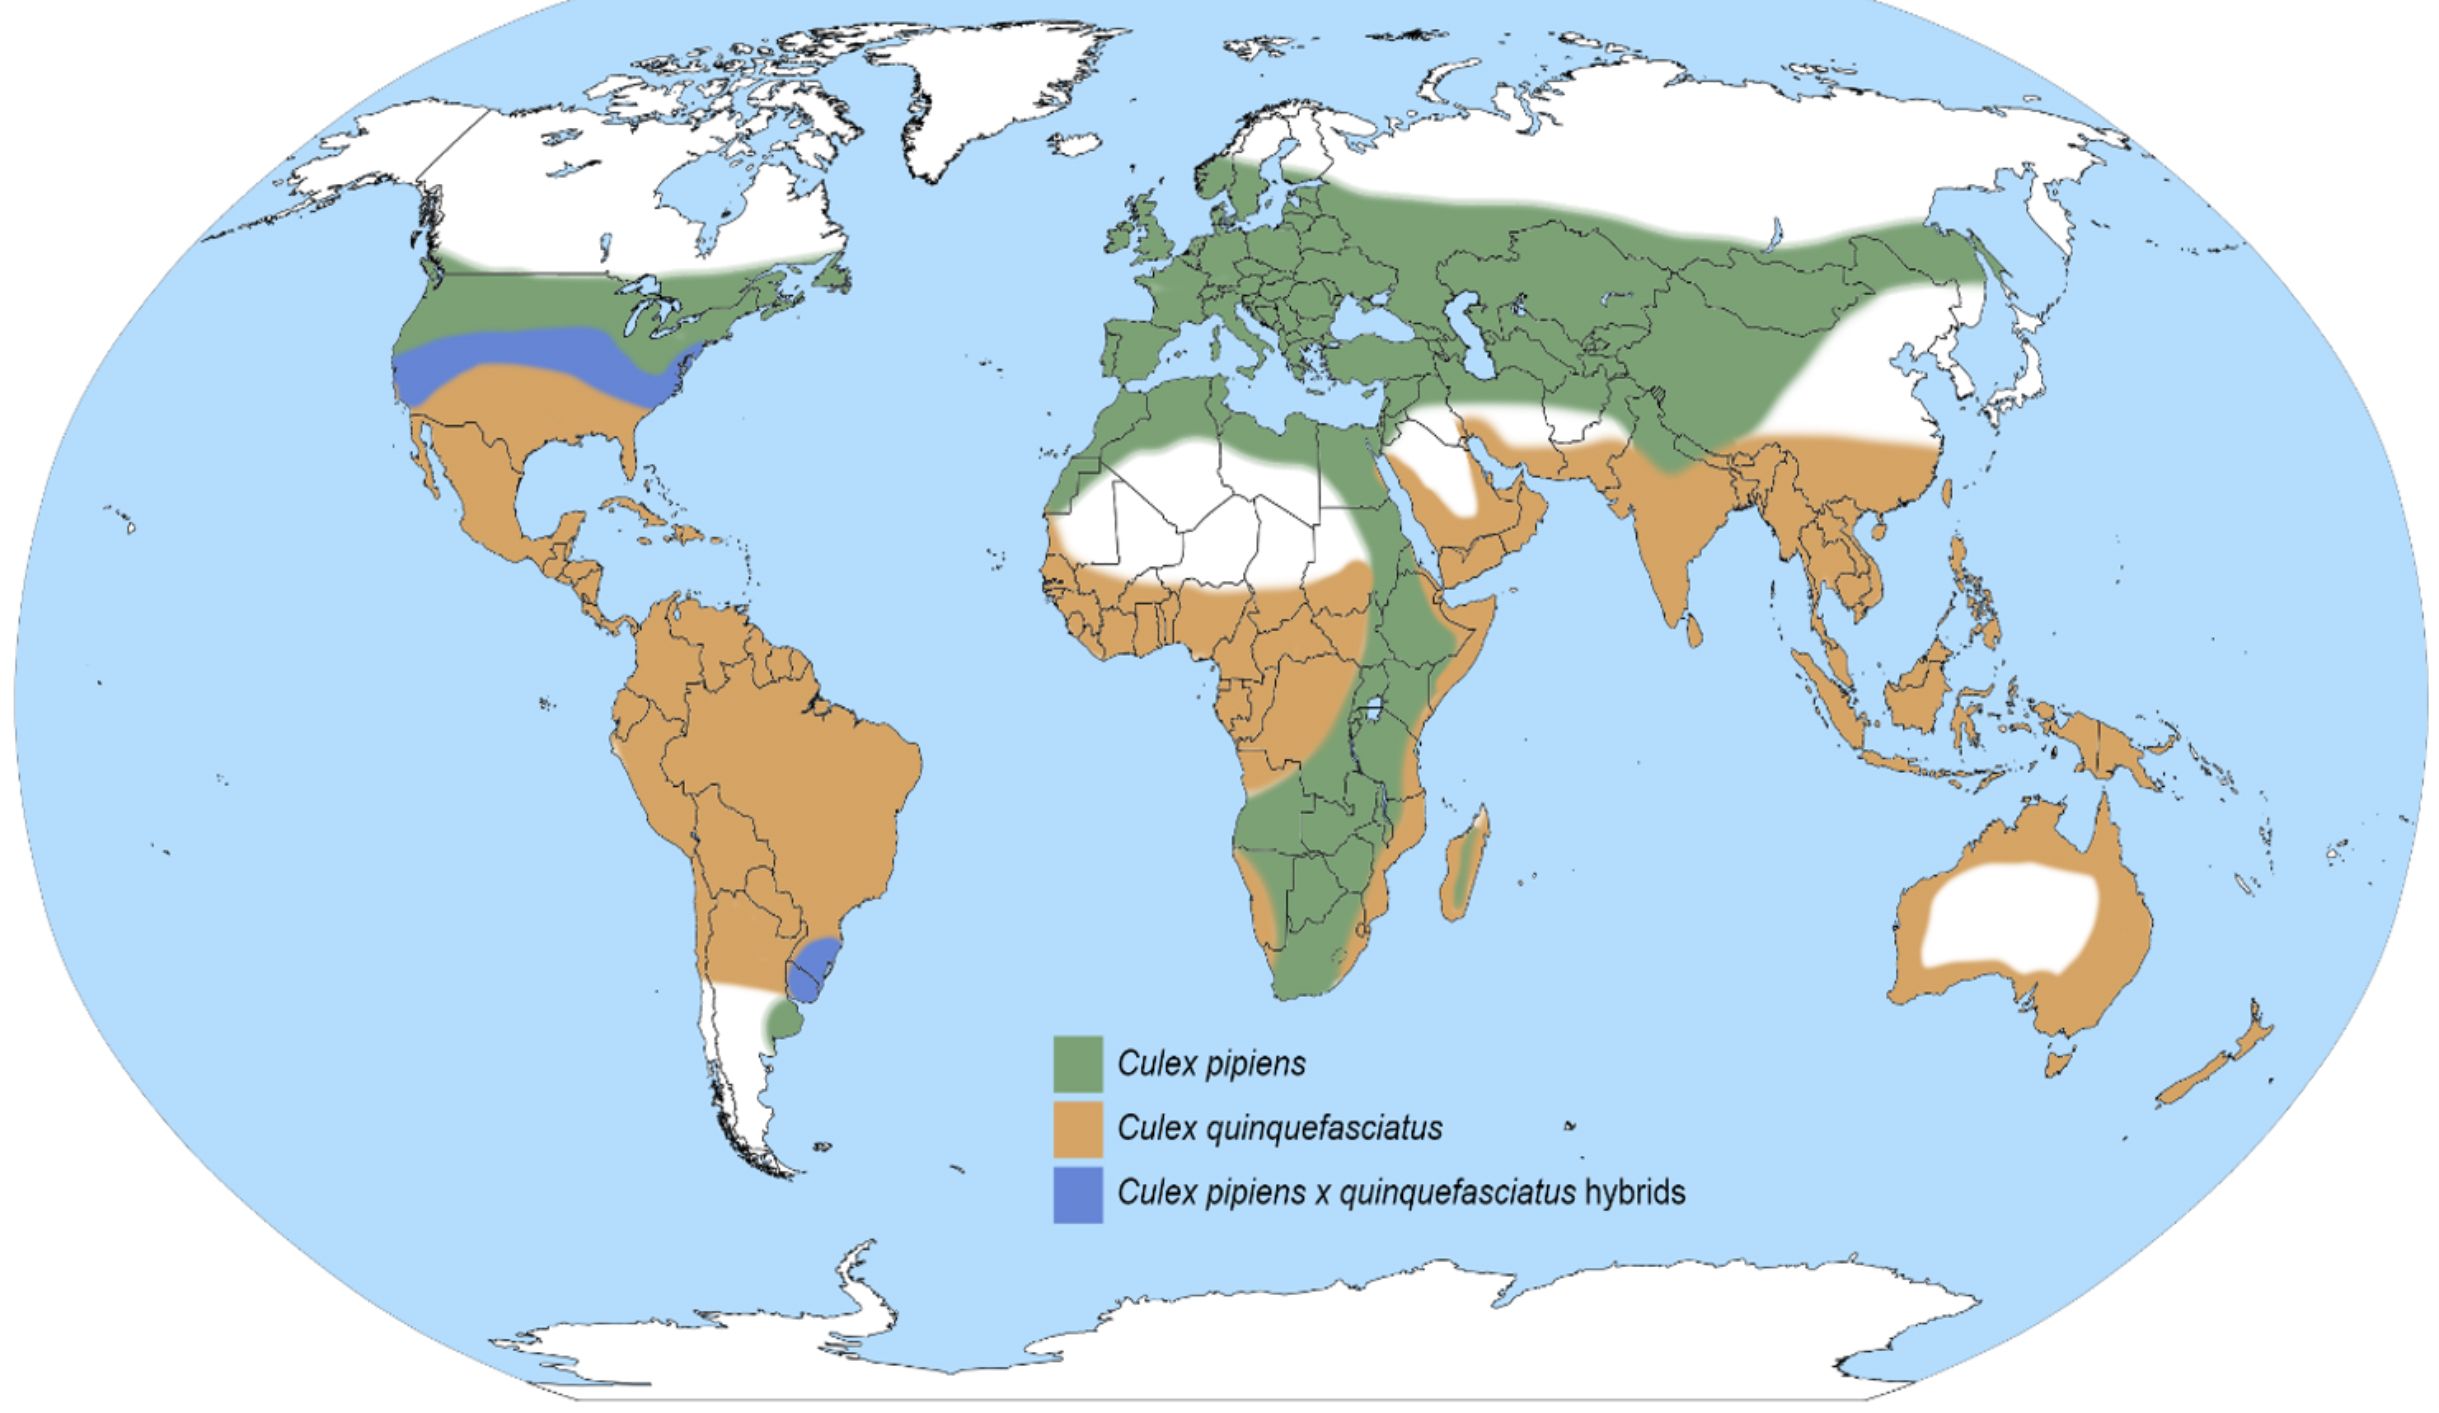 The geographical distribution of Culex pipiens (green), Culex quinquefasciatus (brown), and their hybrids (blue). 